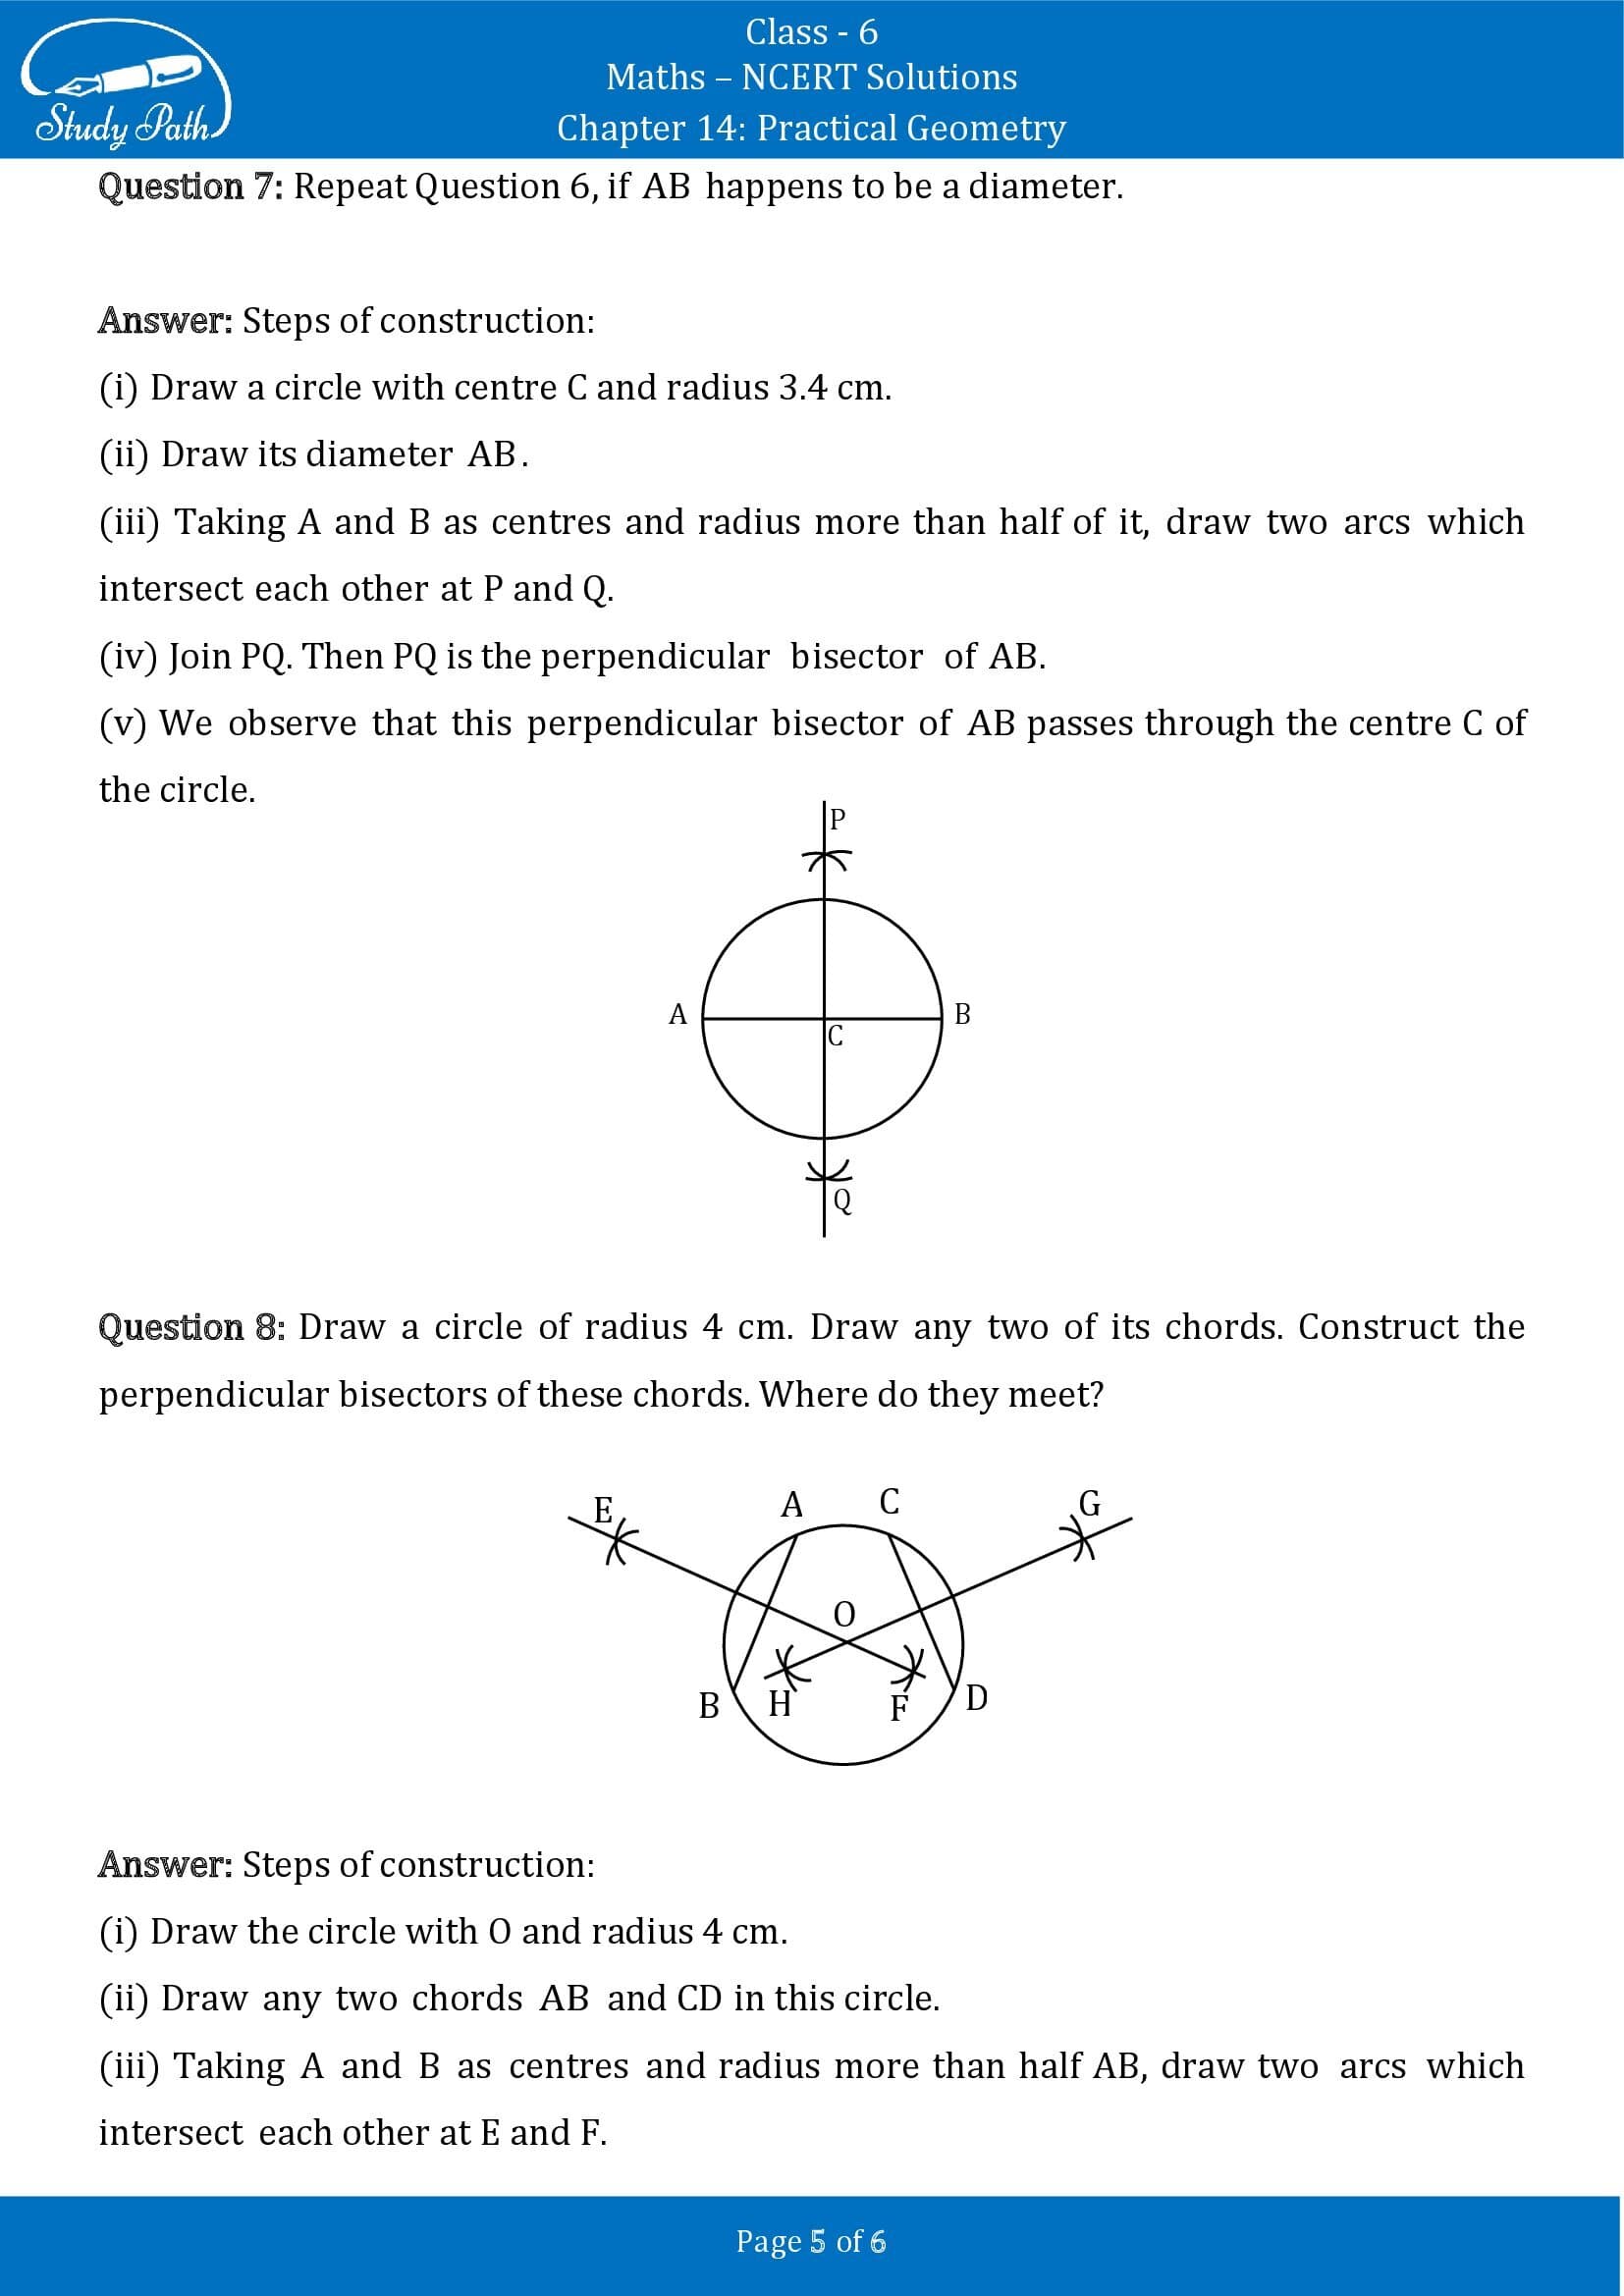 NCERT Solutions for Class 6 Maths Chapter 14 Practical Geometry Exercise 14.5 00005